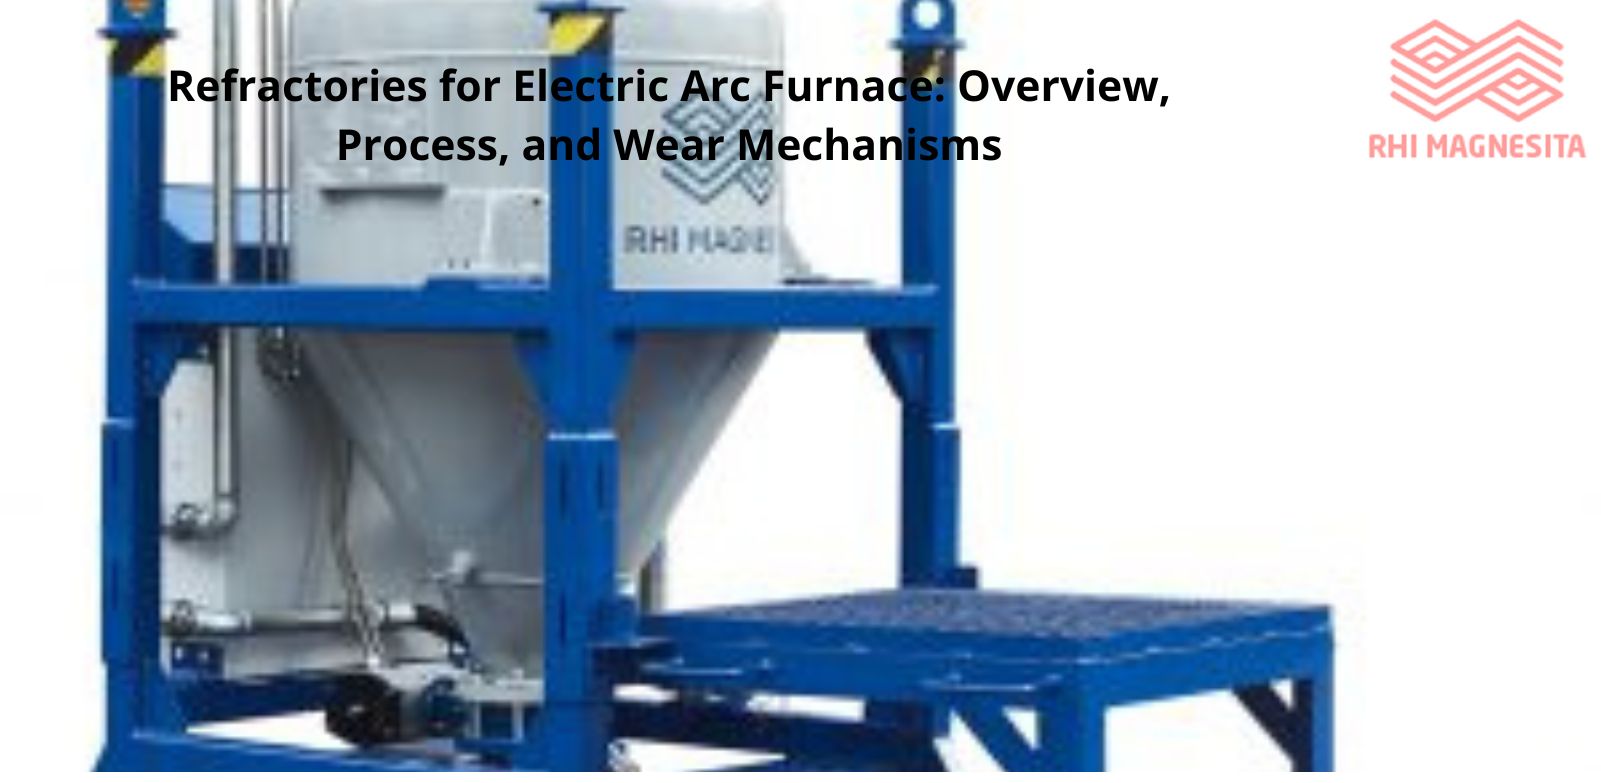 Refractories for Electric Arc Furnace Overview Process and Wear Mechanisms